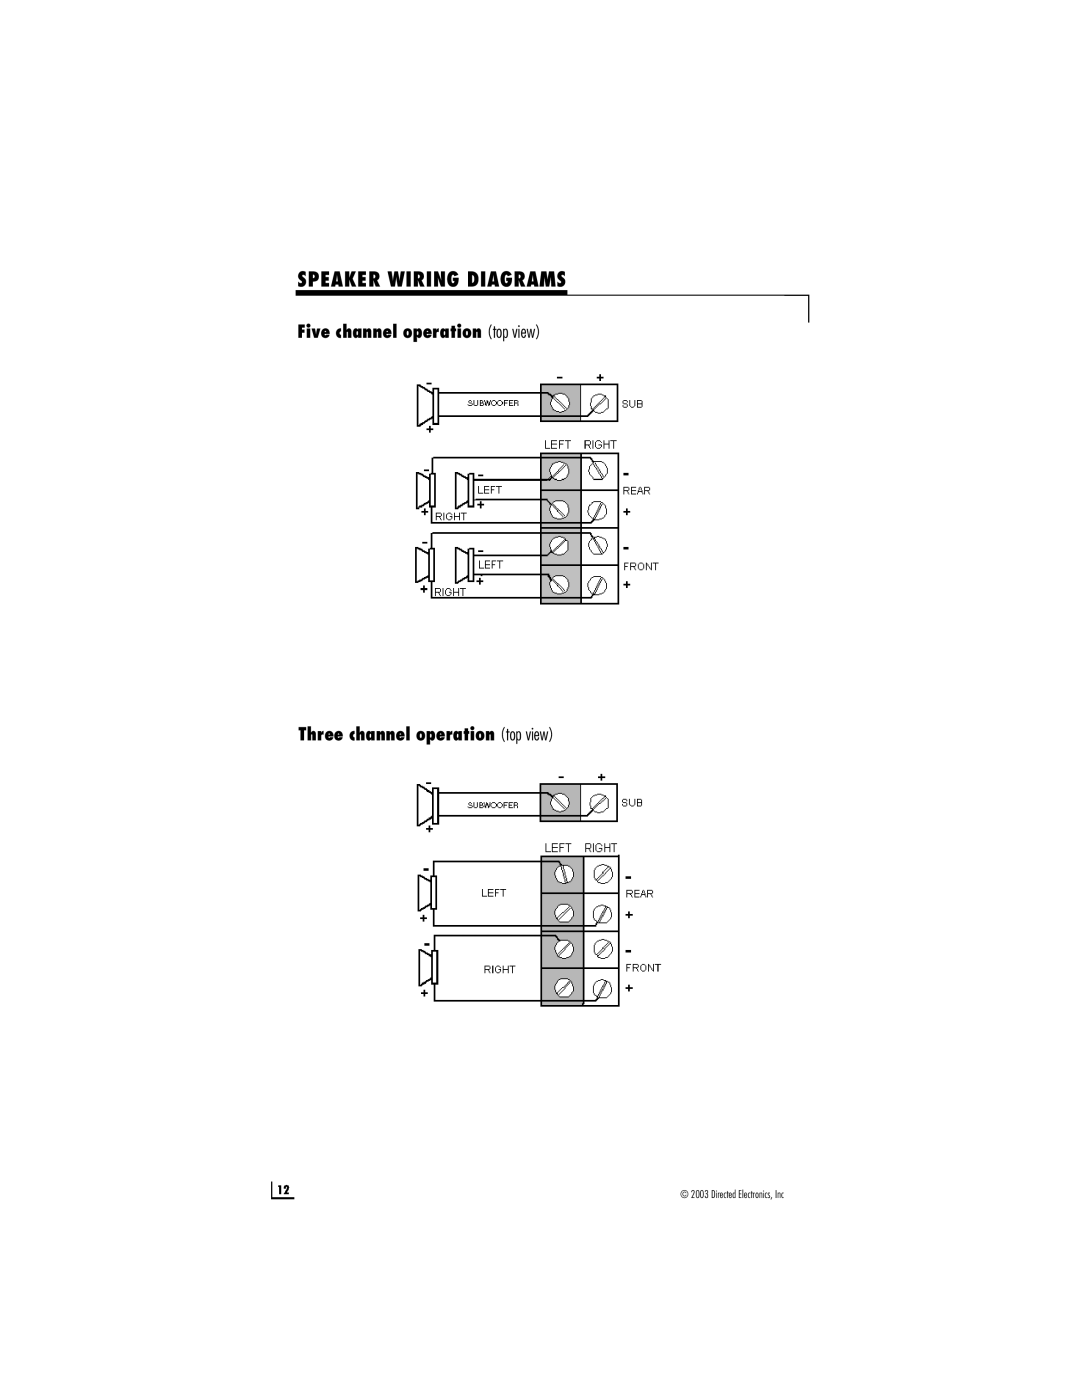 Directed Electronics 600/5 Speaker Wiring Diagrams, Five channel operation top view, Three channel operation top view 